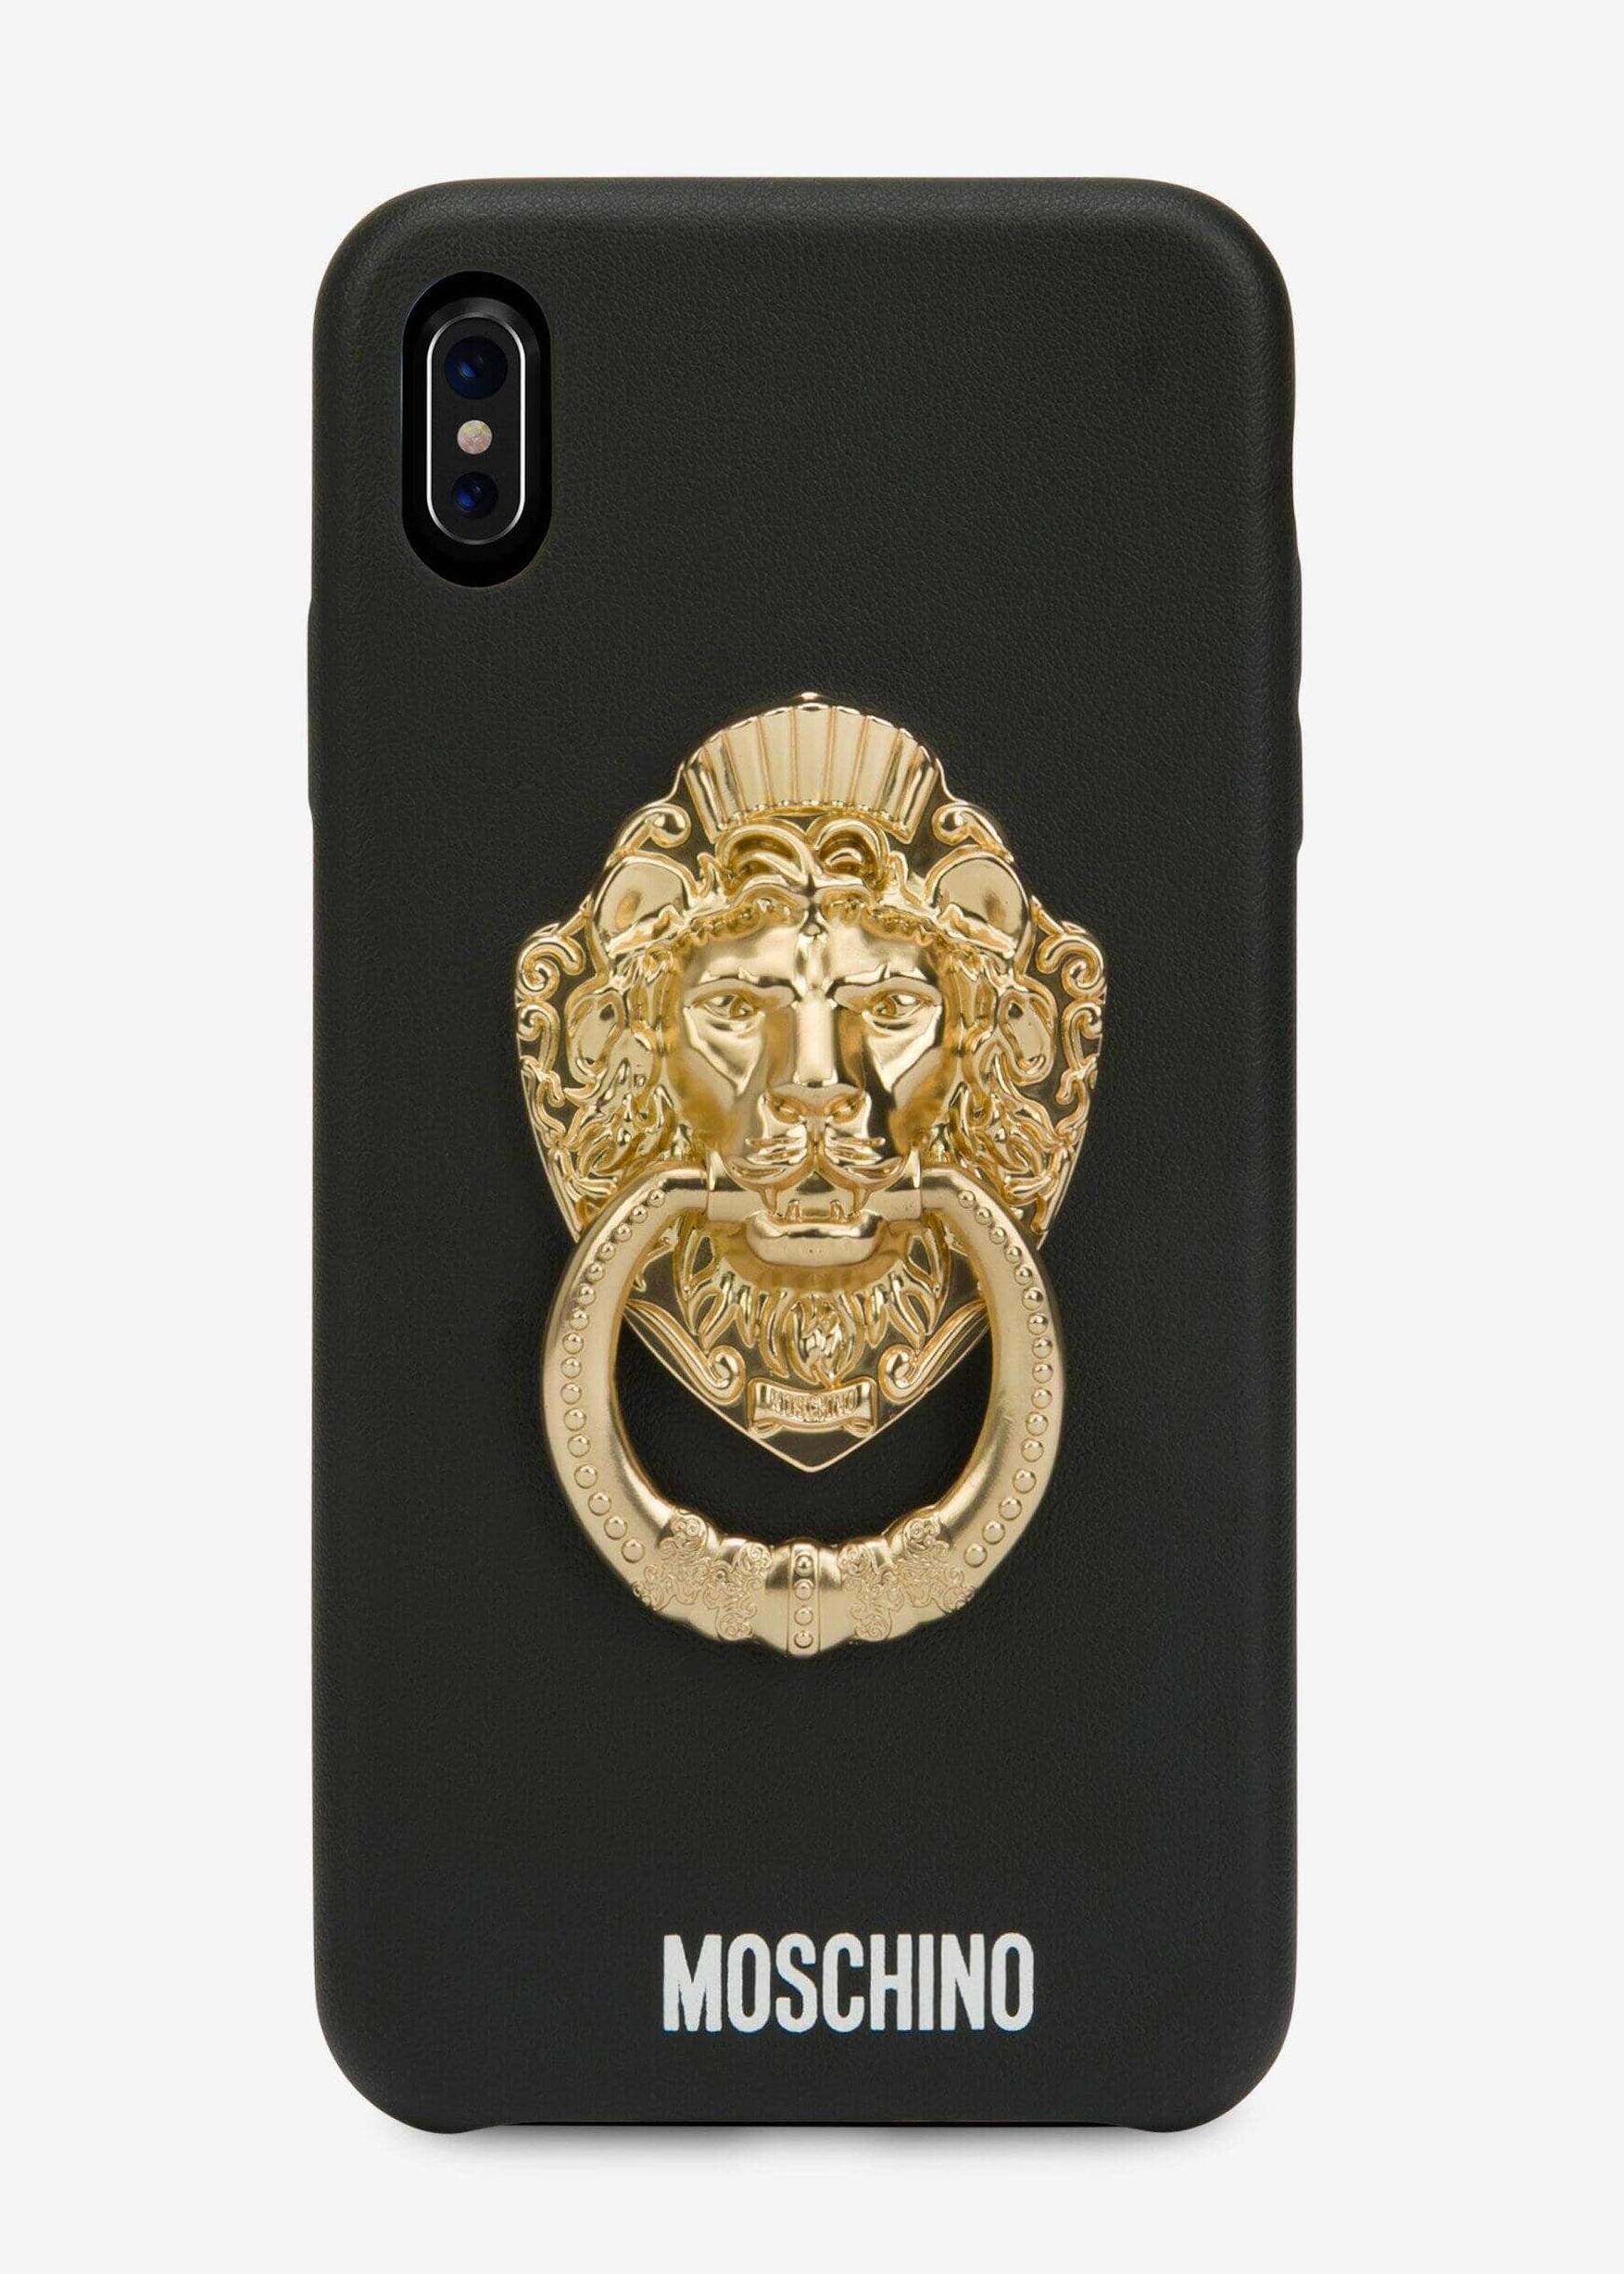 moschino iphone xr case